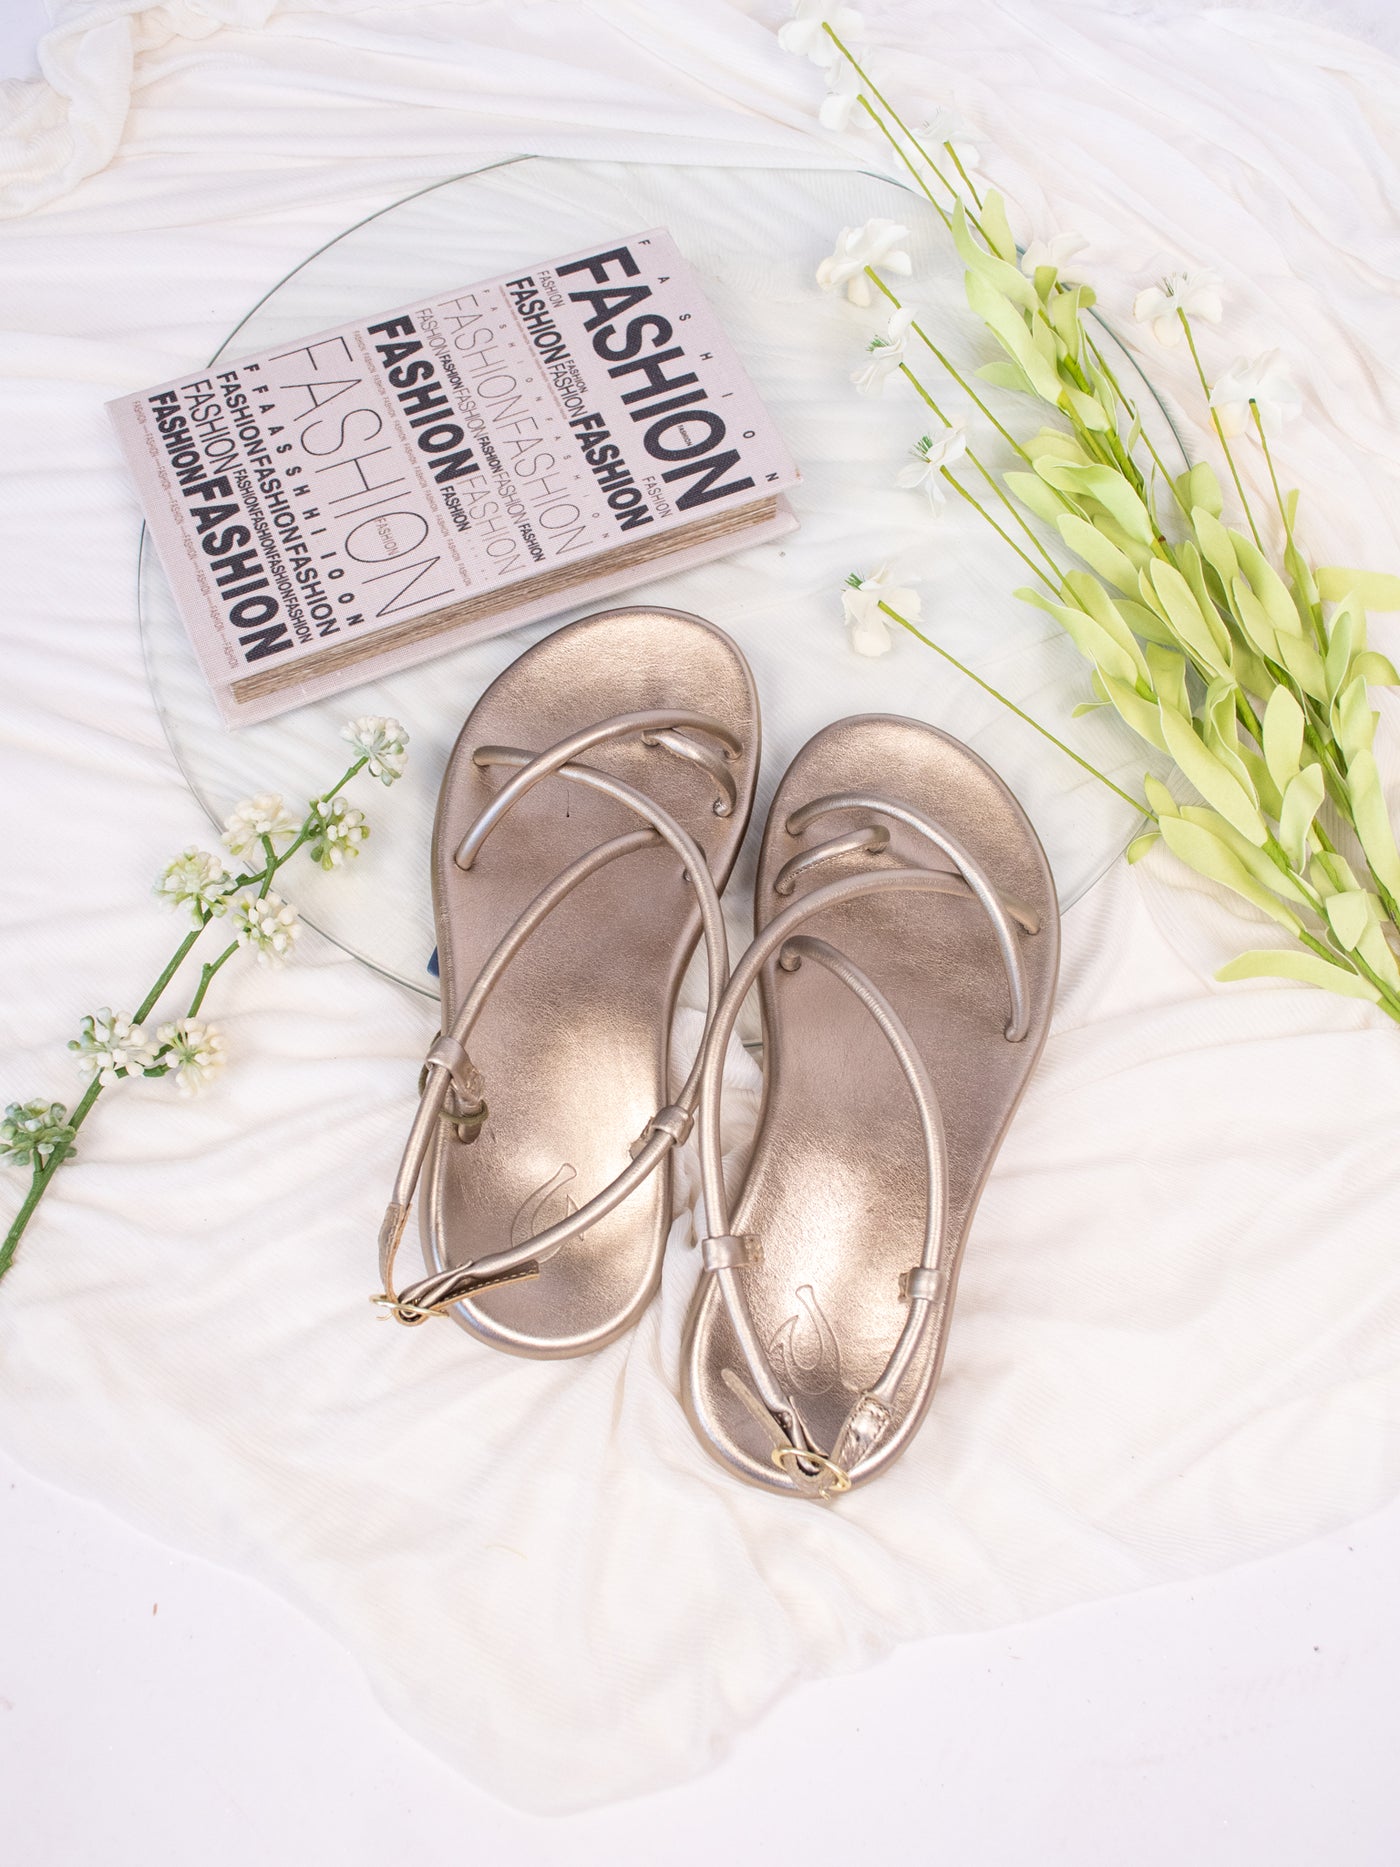 Strappy gold slingback sandals.